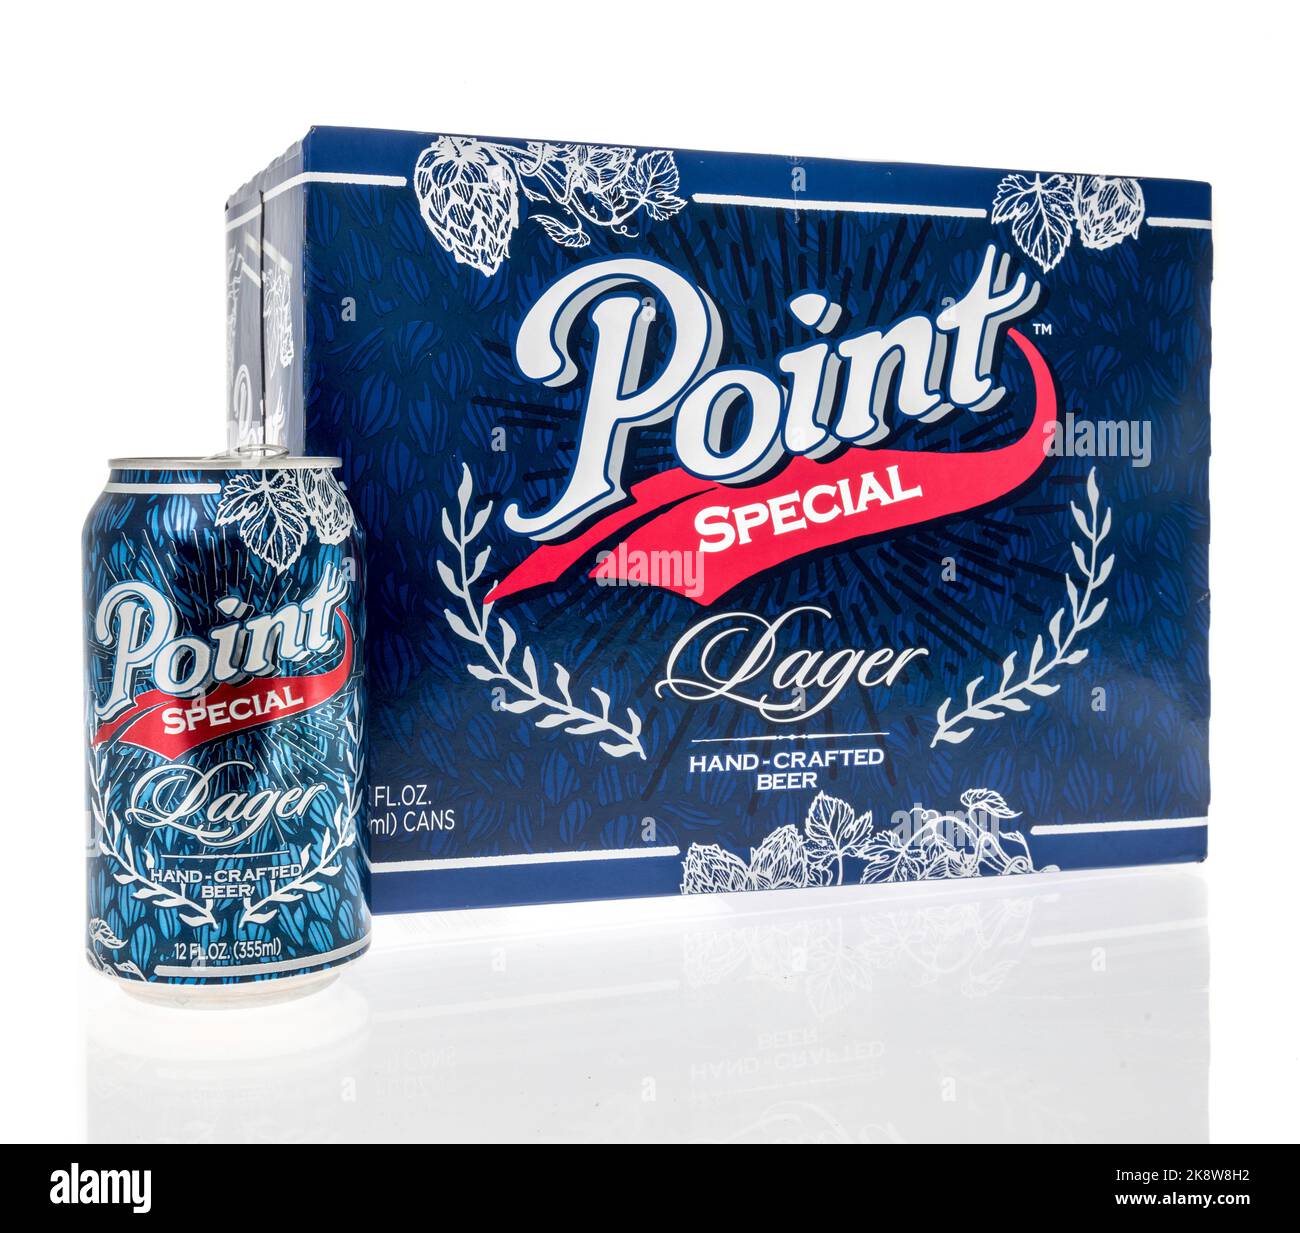 Winneconne, WI - 24 October 2022: A package of Point special lager hand crafted beer on an isolated background. Stock Photo